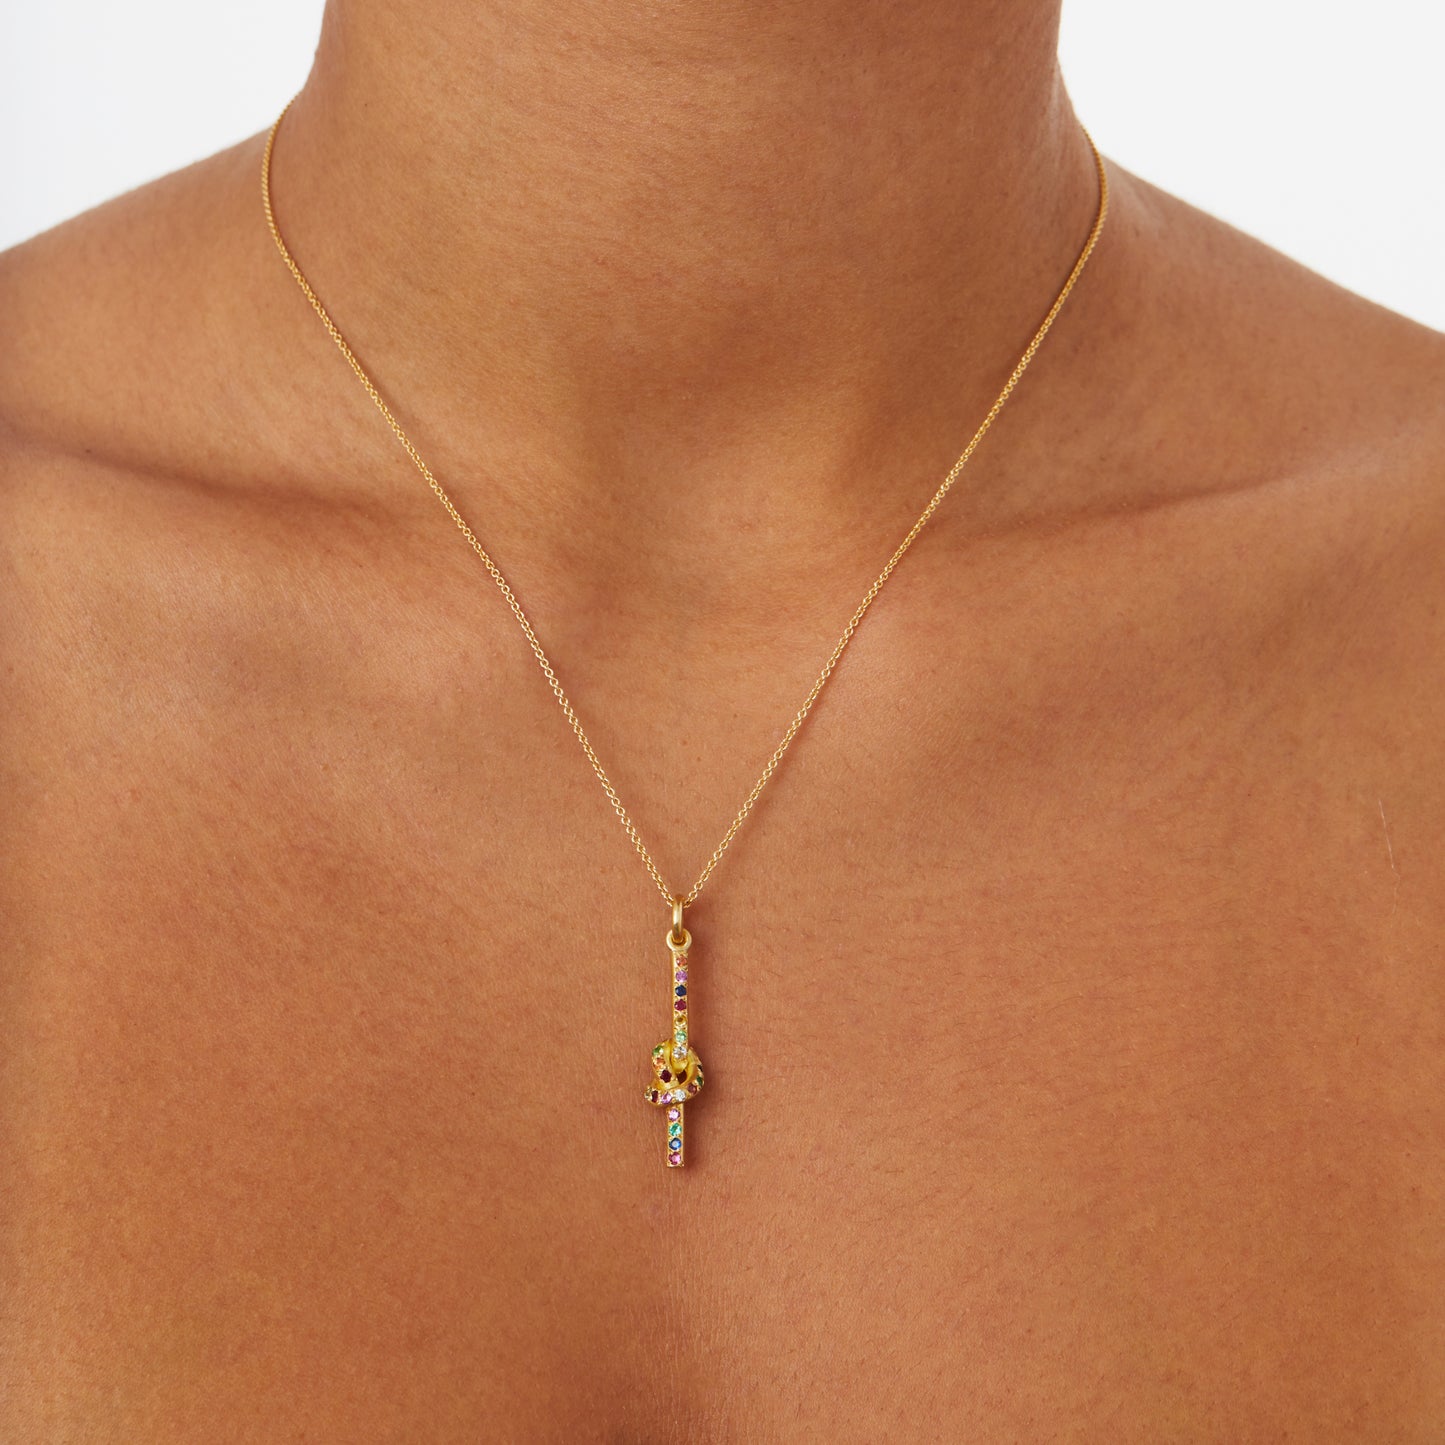 Hundreds And Thousands Pretzel Necklace in 18ct Yellow Gold (In Stock)